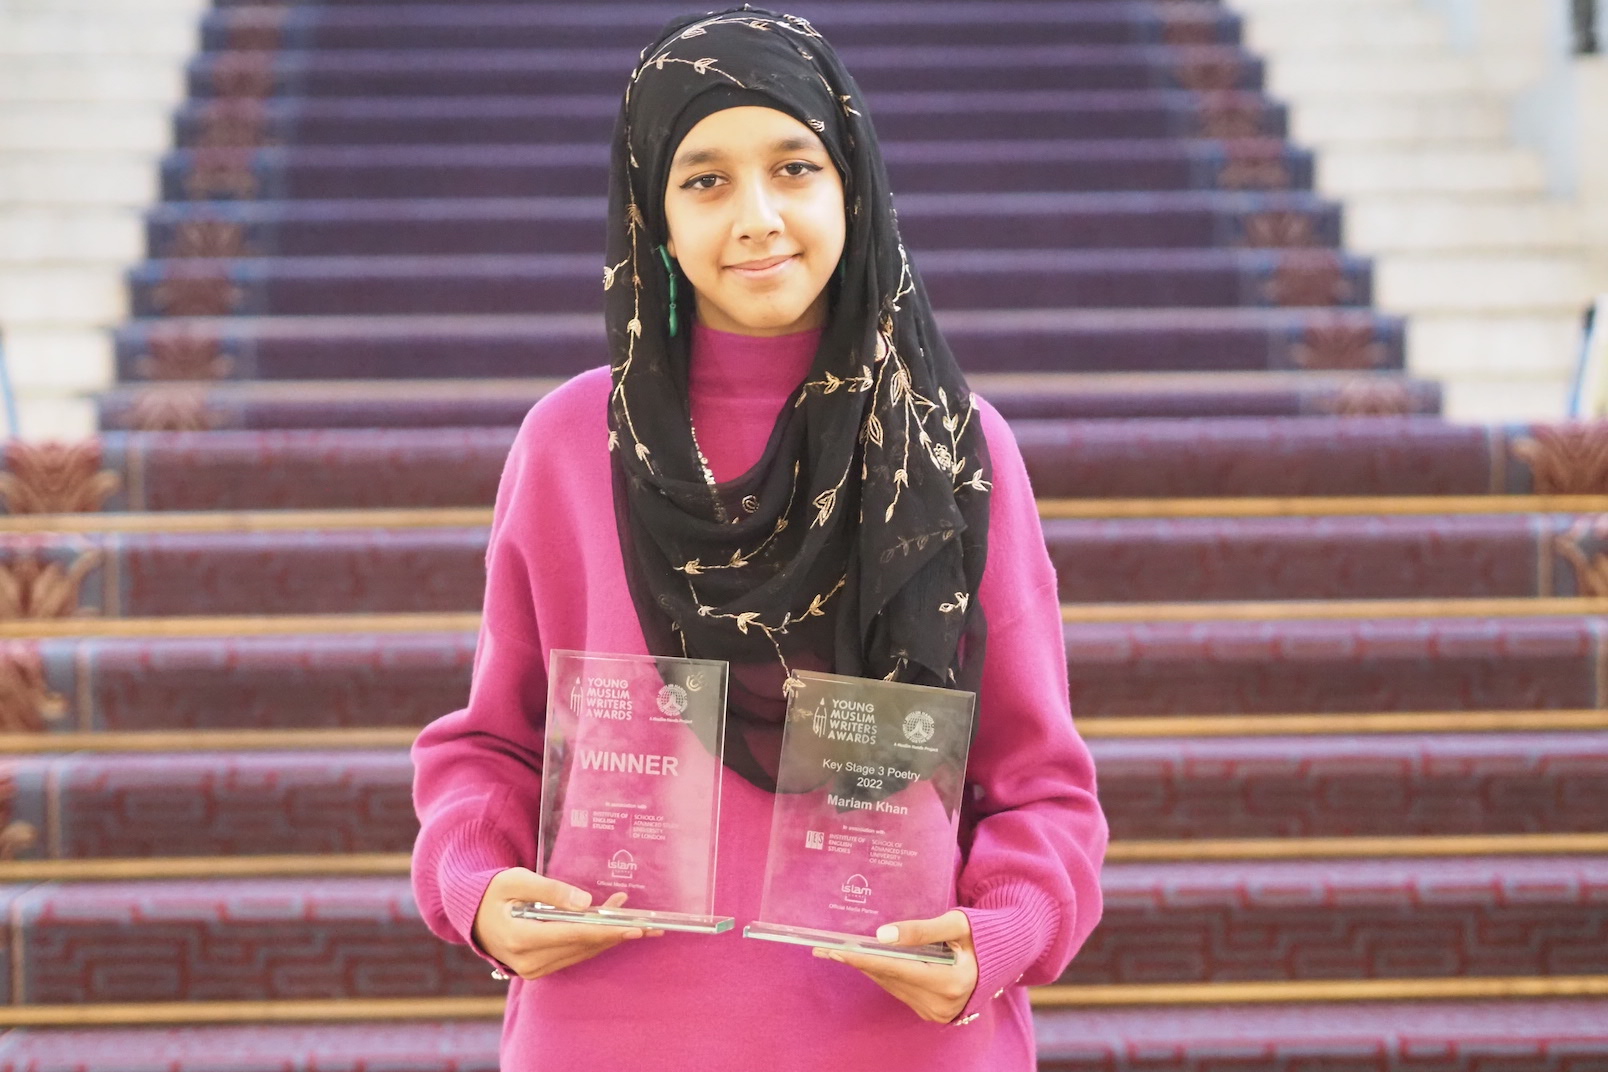 Young Muslim Writers Awards 2022: Winners Show Taste of Creativity - About Islam